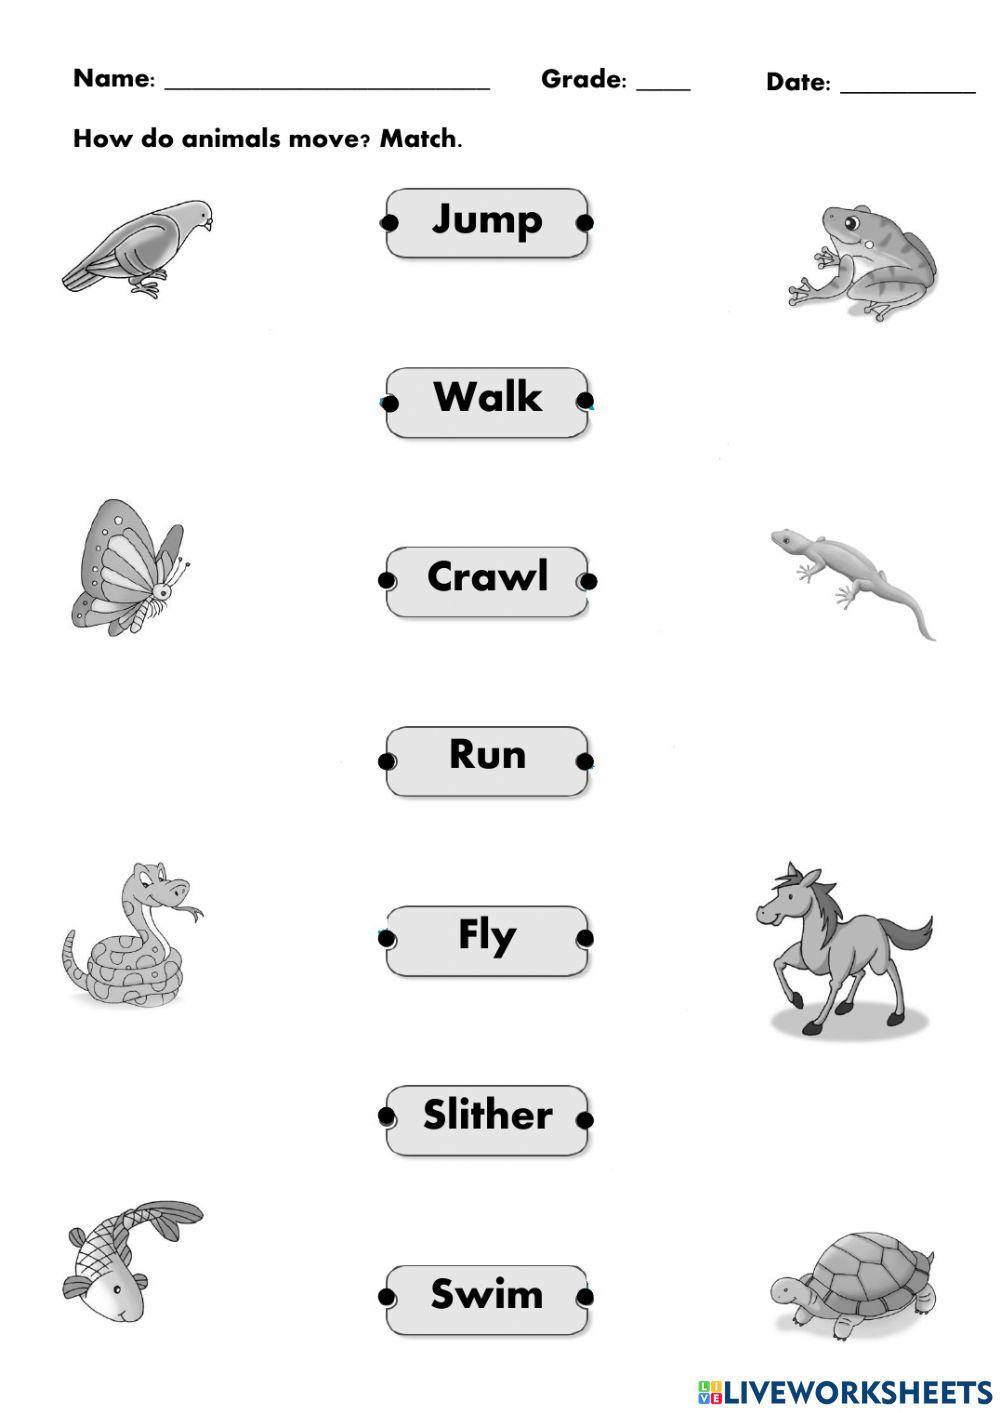 Movements and Parts of Animals